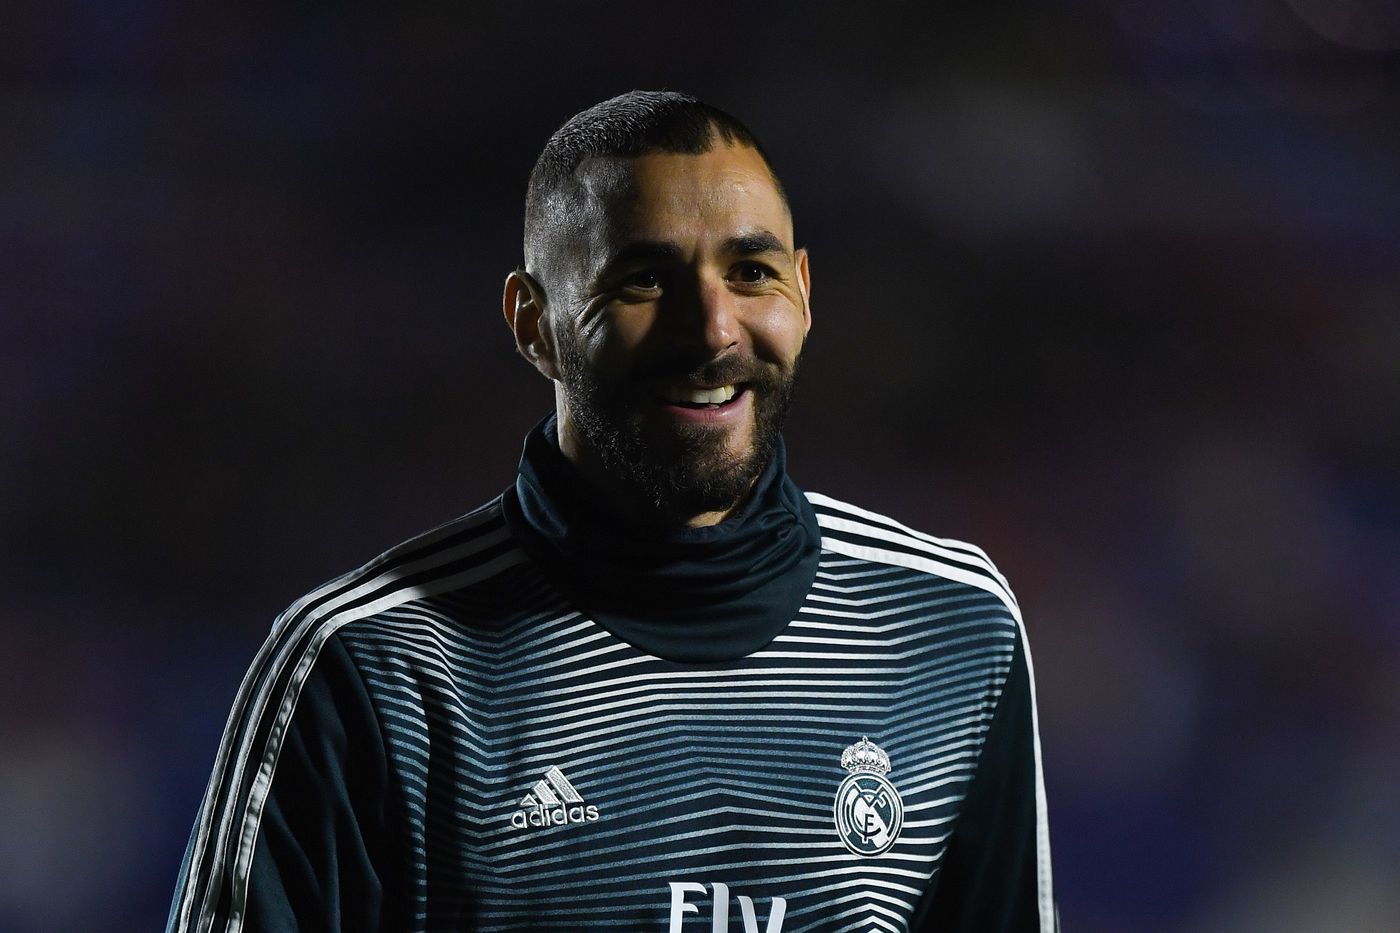 Benzema: “I played for Cristiano all these years, now I’m the leader” - Managing Madrid